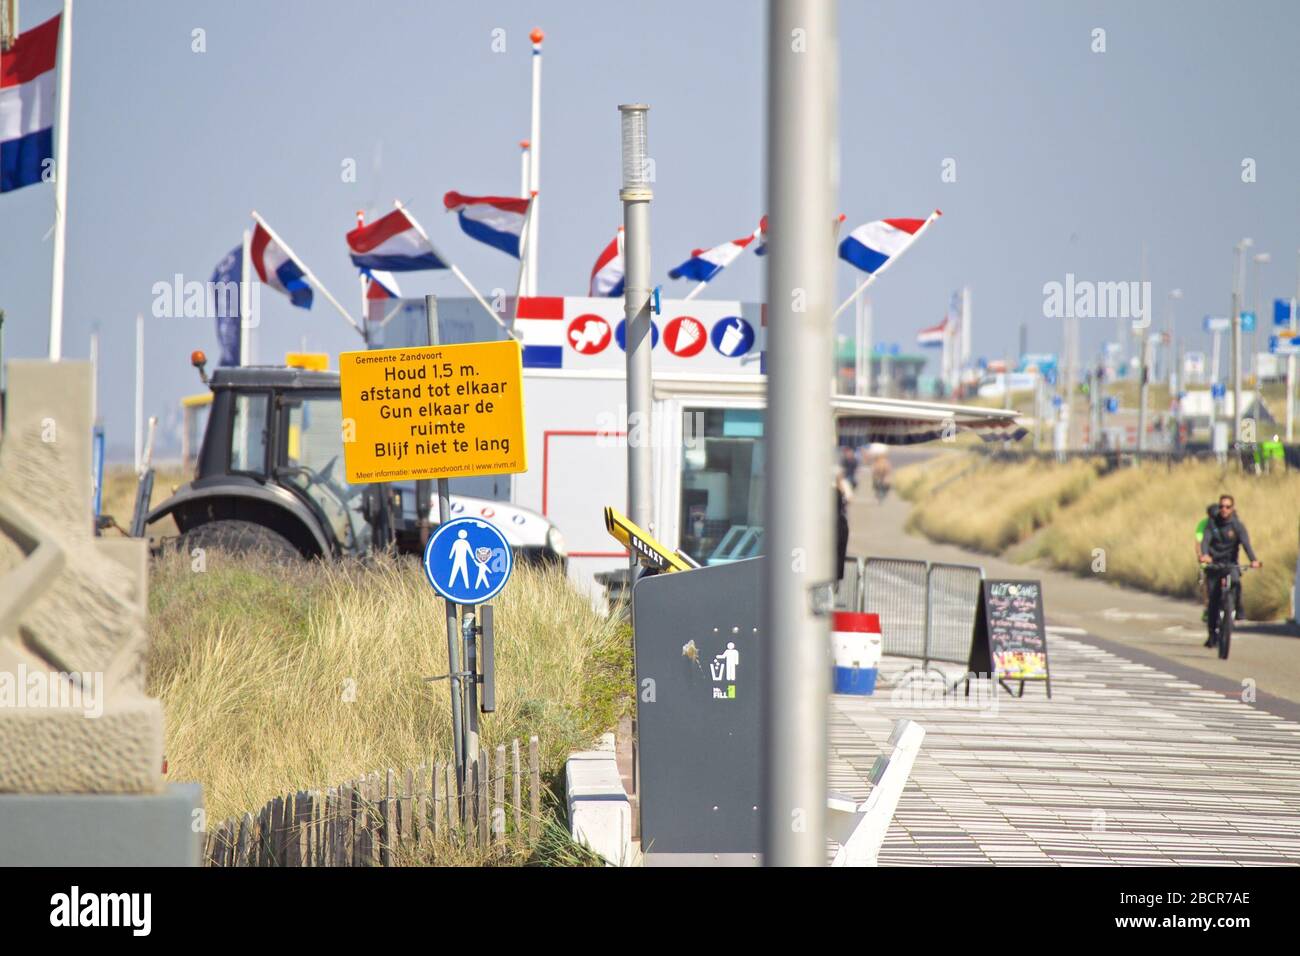 Zandvoort, Netherlands. 5th Apr, 2020. Behavioural sign is seen at Zandvoort beach, the Netherlands, April 5, 2020. The number of coronavirus infection cases in the Netherlands rose by 904 to 16,627 and the death toll of COVID-19, a disease caused by the virus, has increased by 164 to 1,651 from Friday to Saturday, according to the Dutch National Coordination Center for Patient Distribution (LCPS). Credit: Sylvia Lederer/Xinhua/Alamy Live News Stock Photo